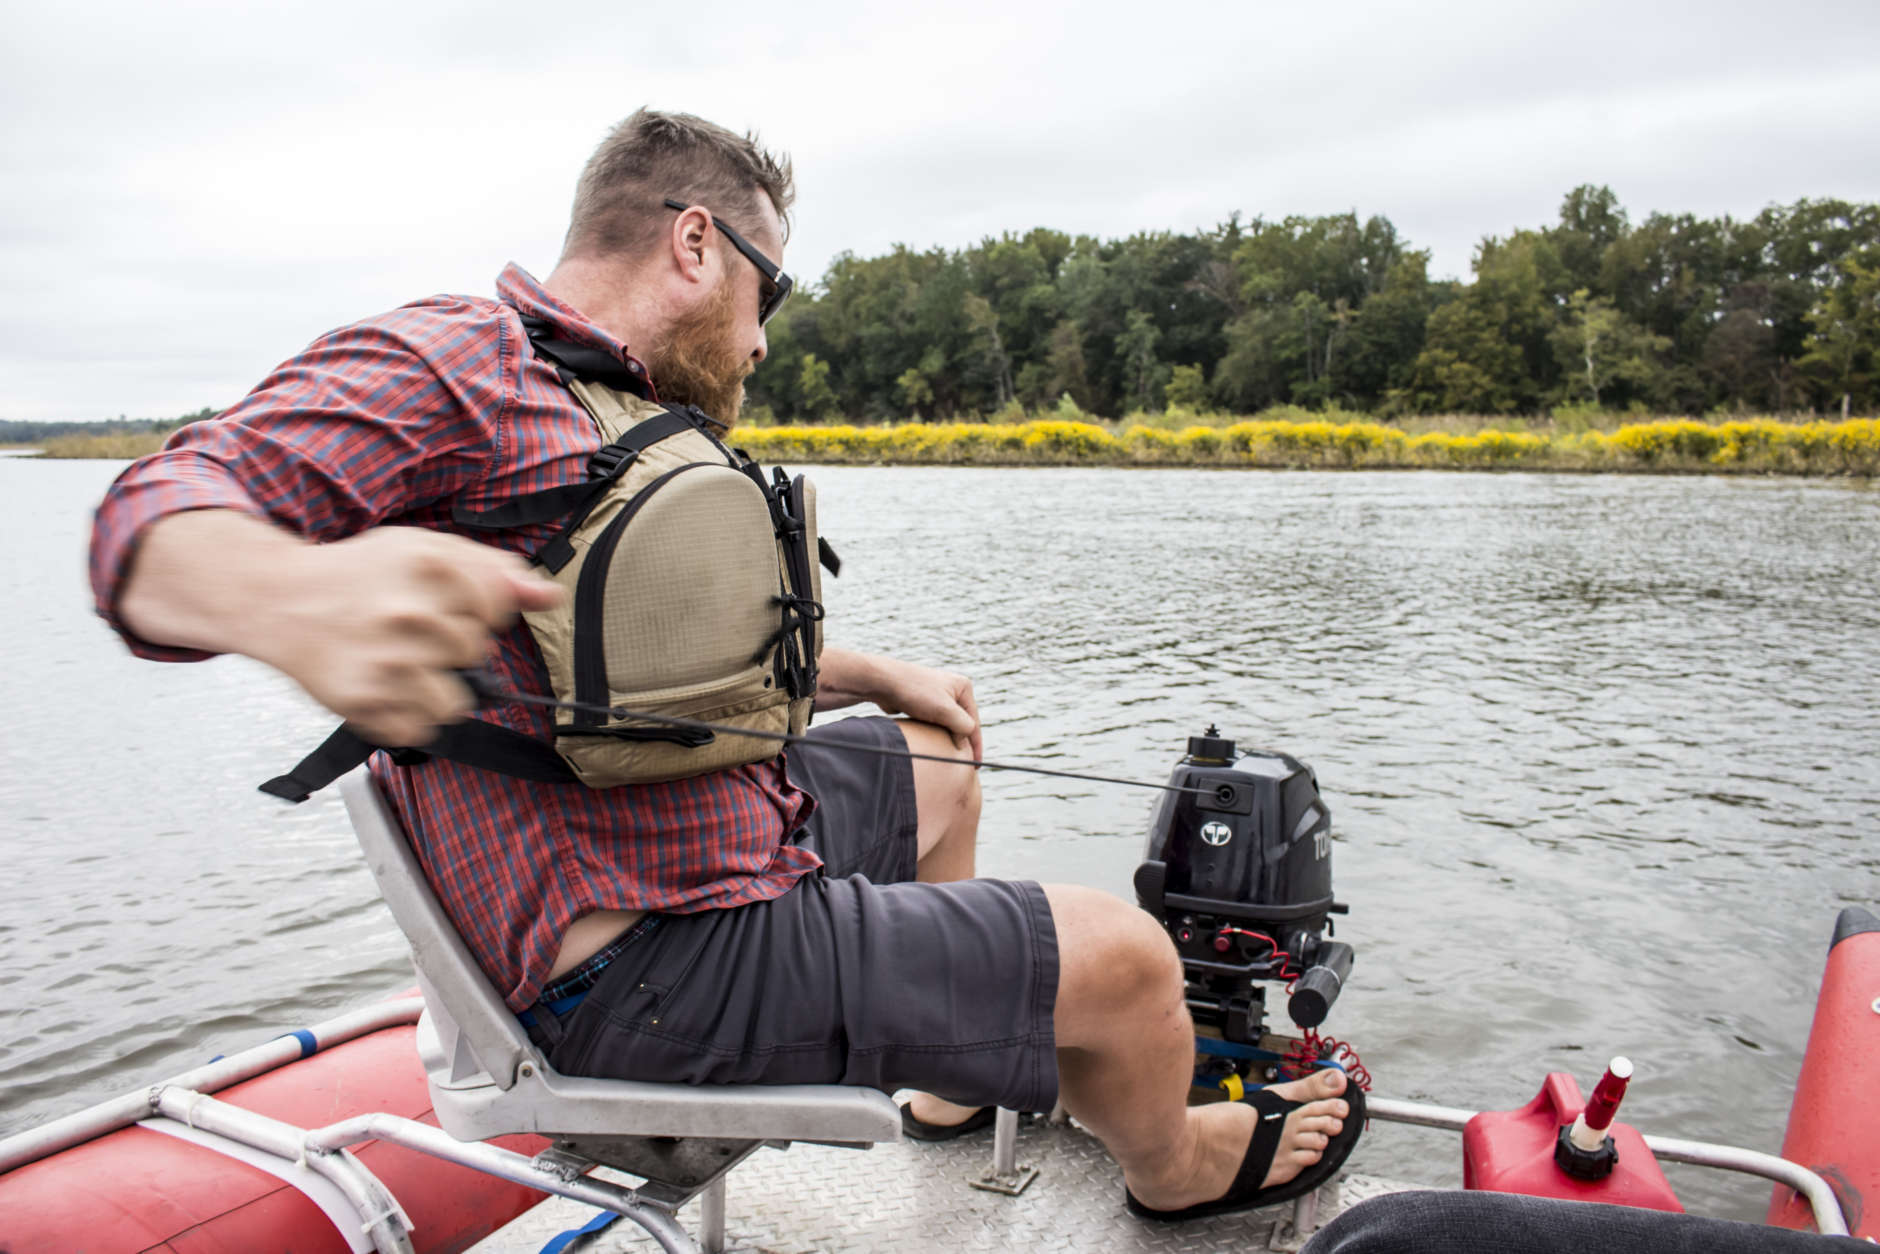 Terrain 360 founder Ryan Abrahamsen rips the pull cord to start the motor, Tuesday Sept. 26, 2017, in Upper Marlboro, Maryland. Abrahamsen is mapping the Patuxent River, in partnership with the Chesapeake Conservancy, to create virtual river tours. (Alex Mann/Capital News Service)